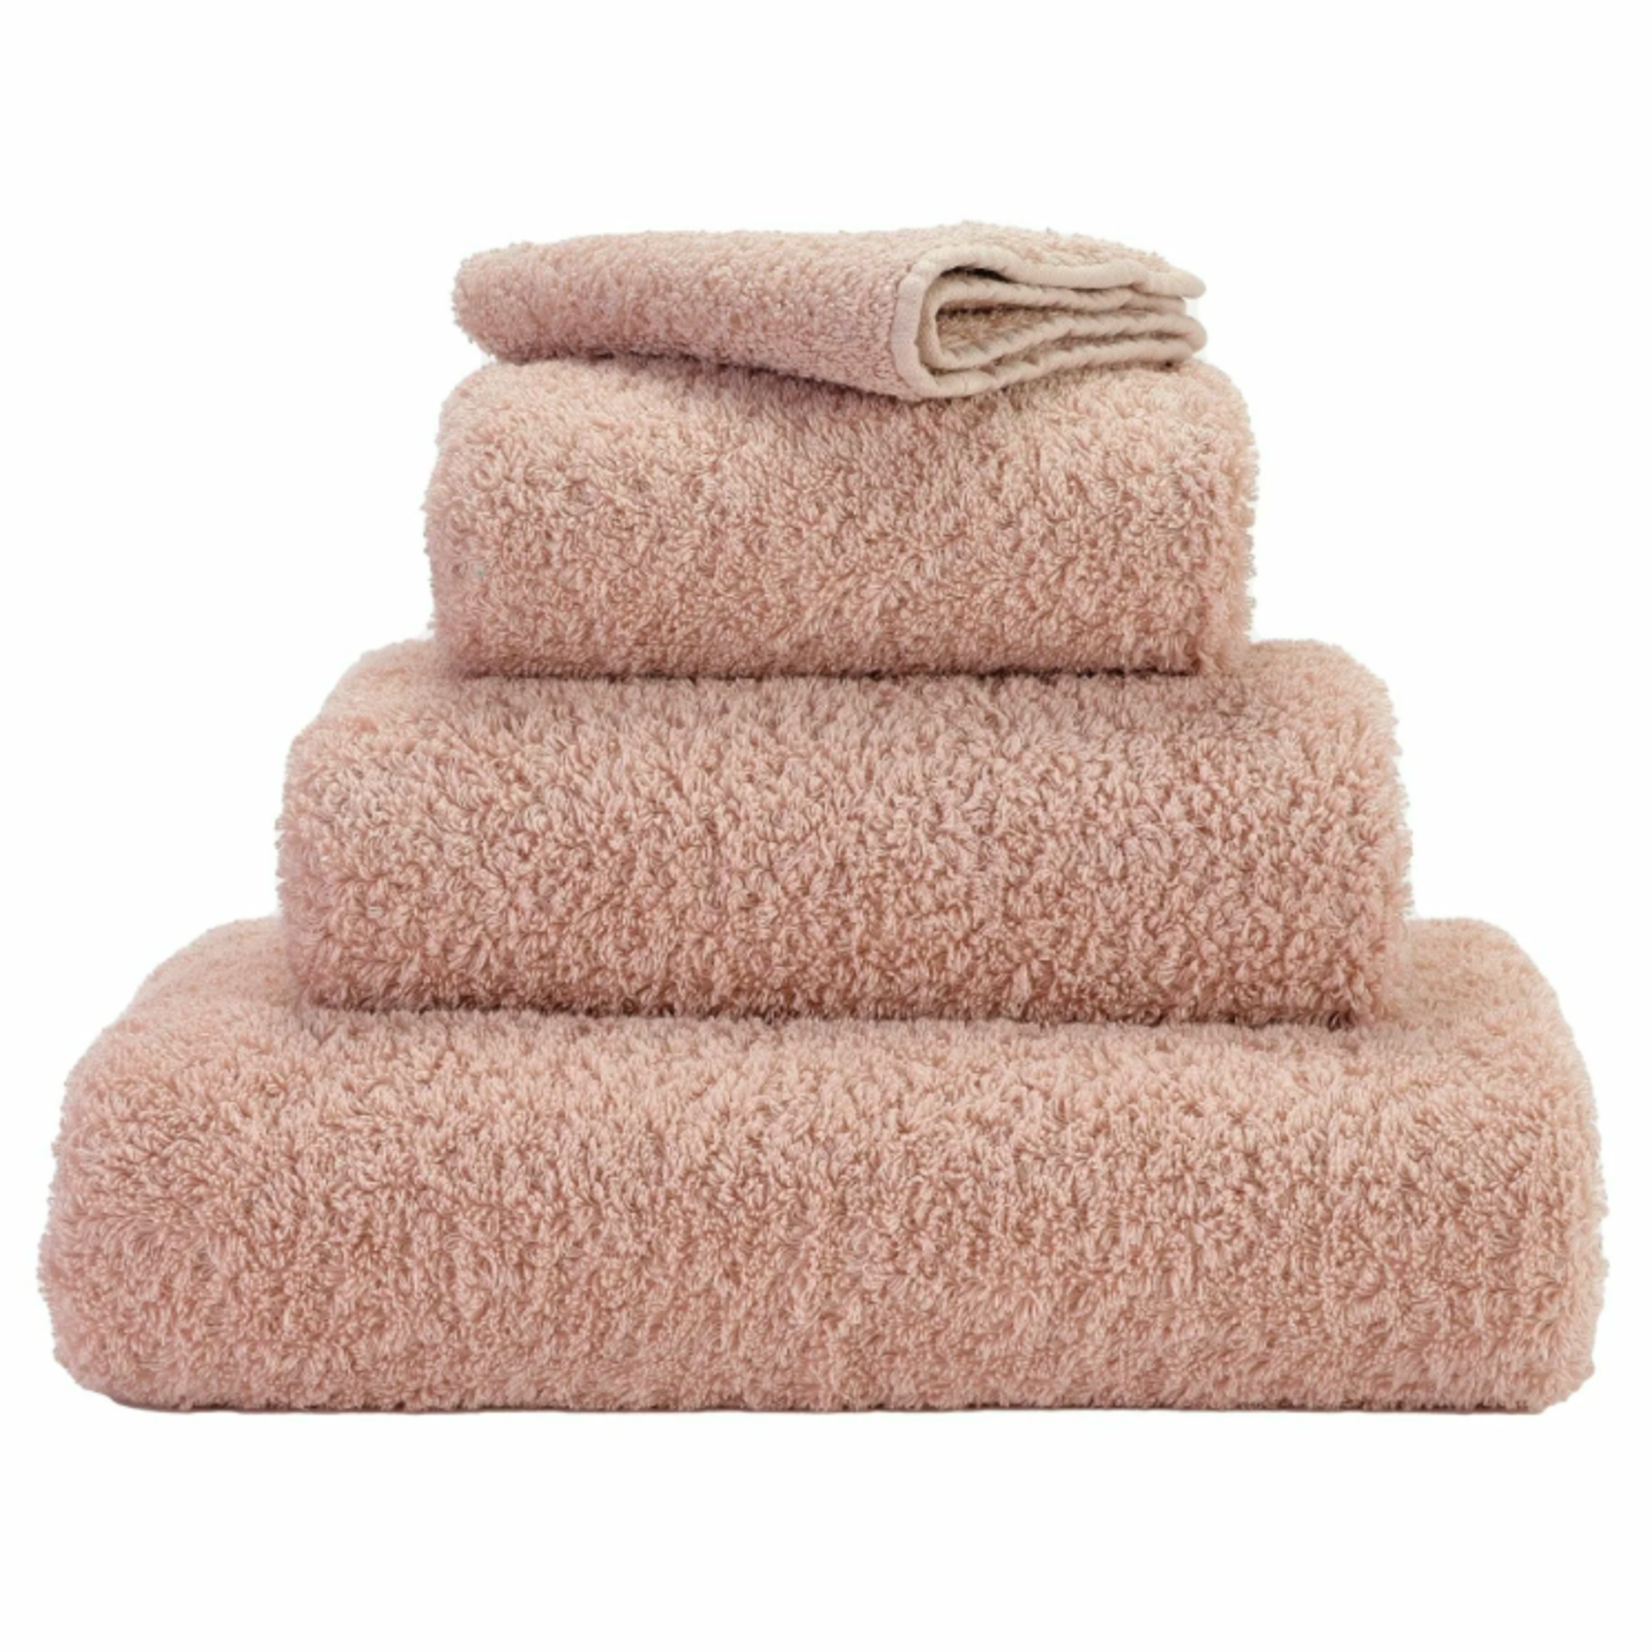 Abyss Abyss Super Pile Towels 518 Primrose